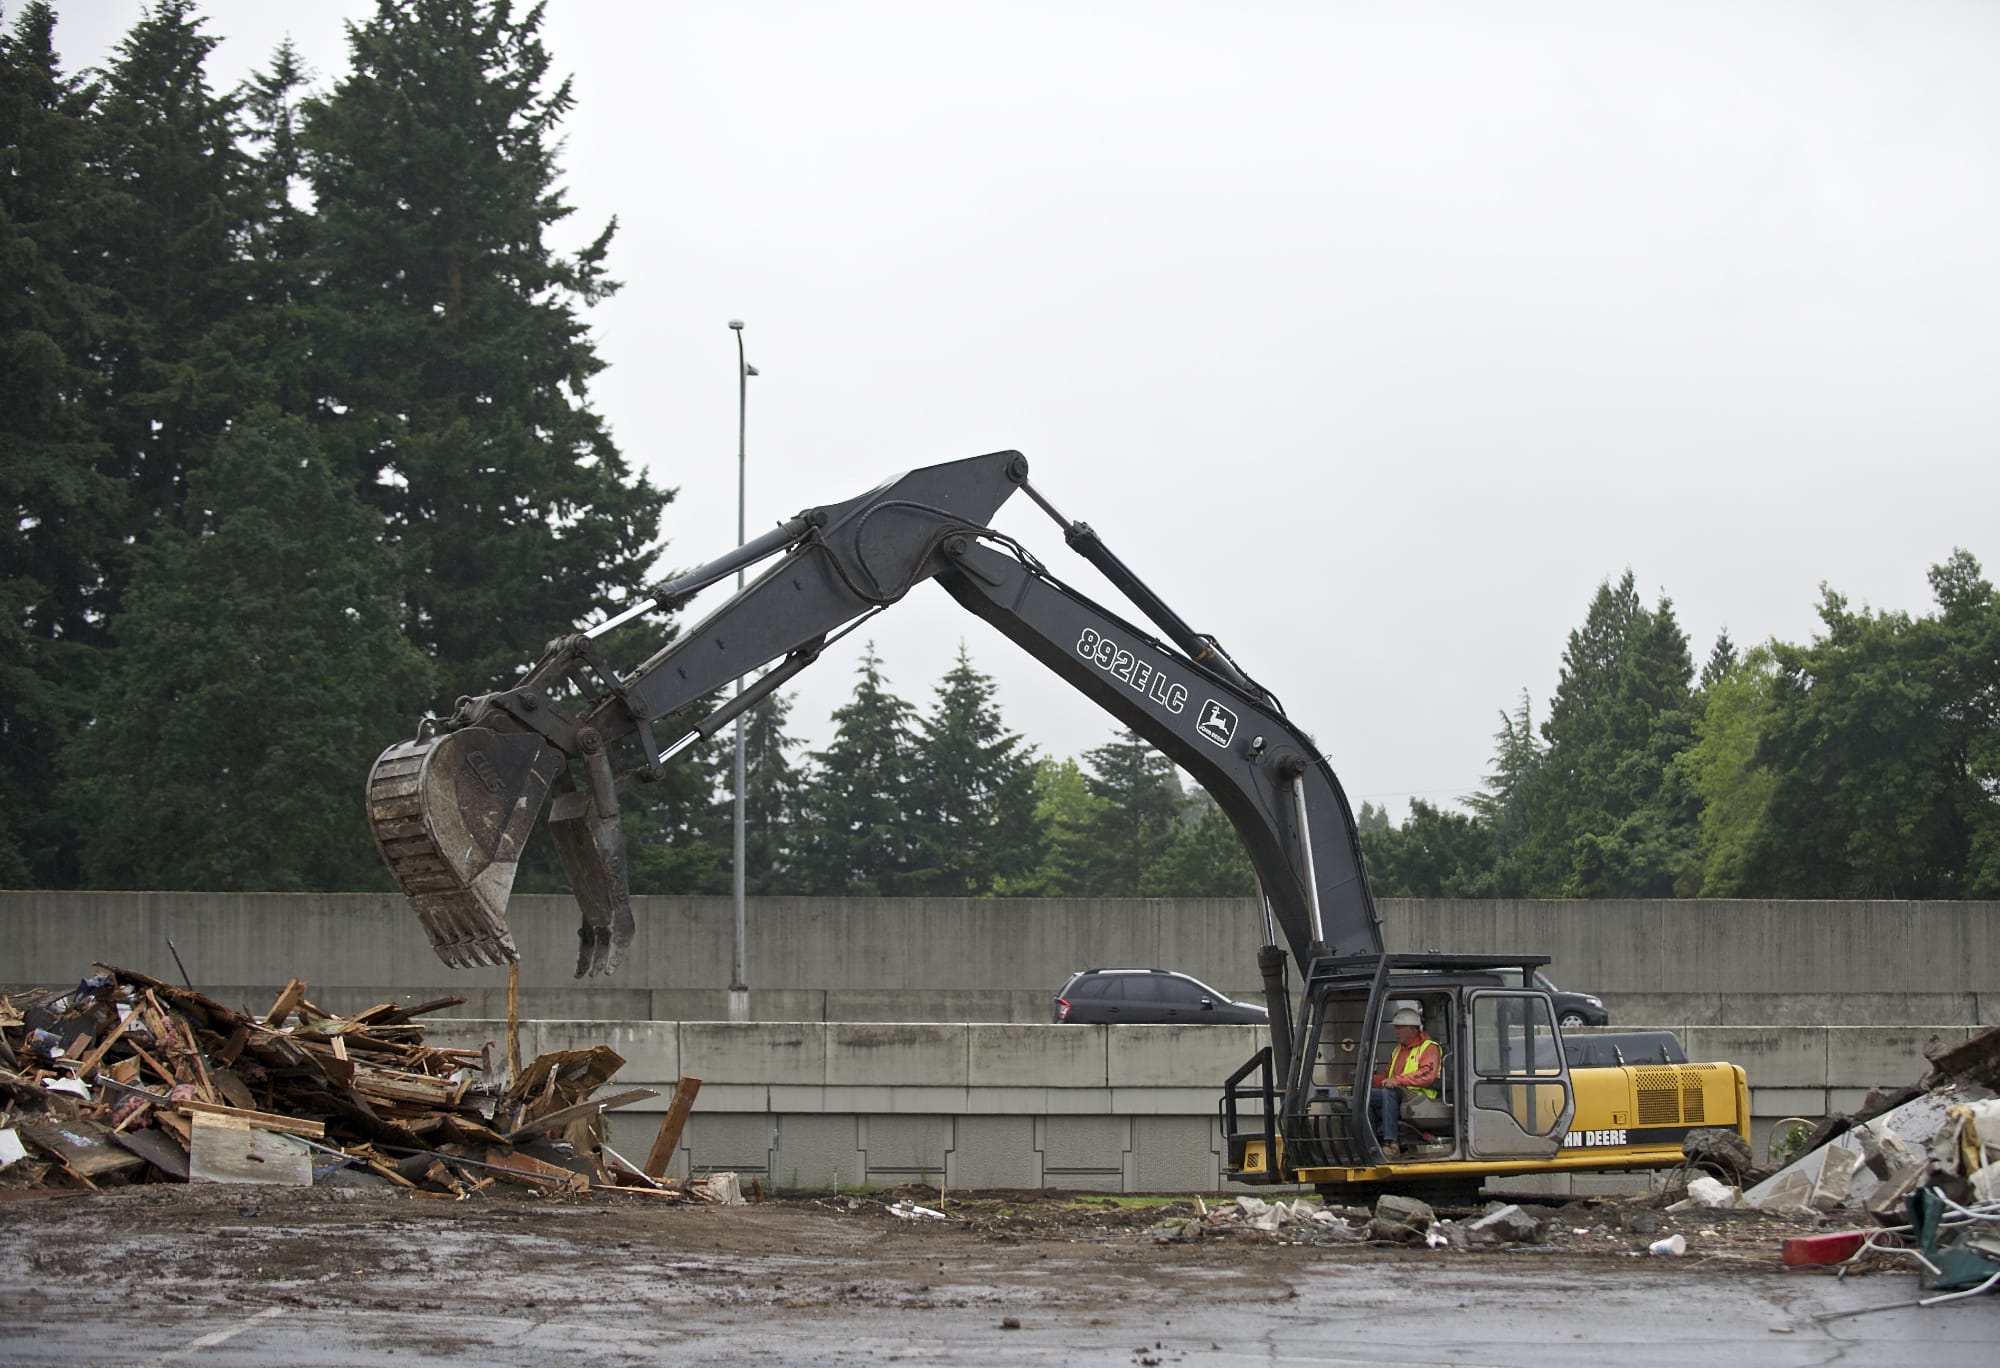 Not much was left of the iconic Steakburger on Tuesday morning as demolition crews made quick work of a restaurant that was popular with generations of Vancouver residents. The original Steakburger dates to the 1940s, and the building at 7120 N.E. Highway 99 opened Jan.